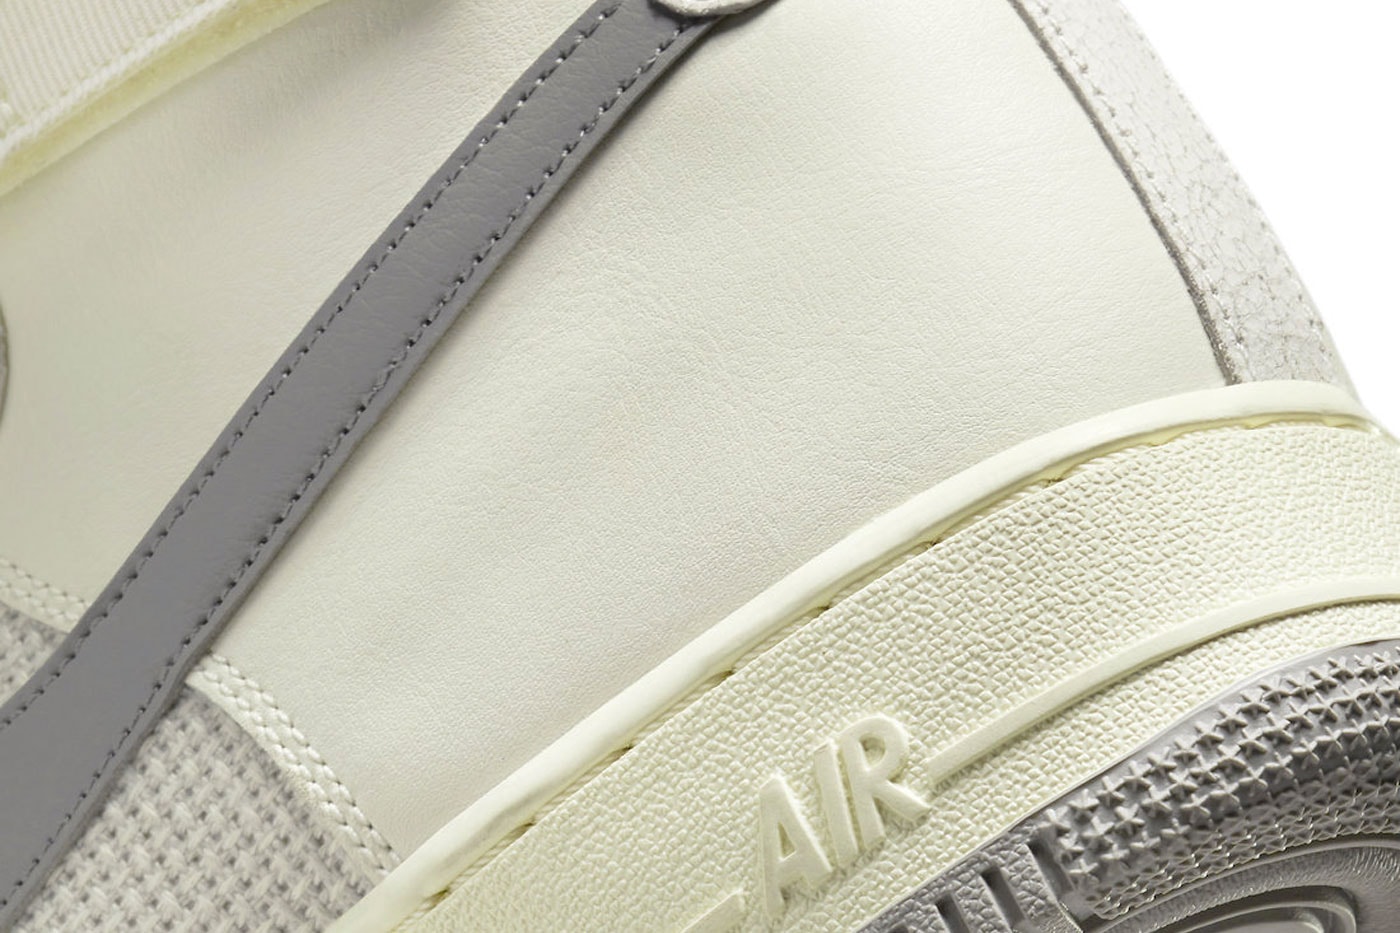 Nike Reveals Special Edition Air Force 1 High Vintage Sail